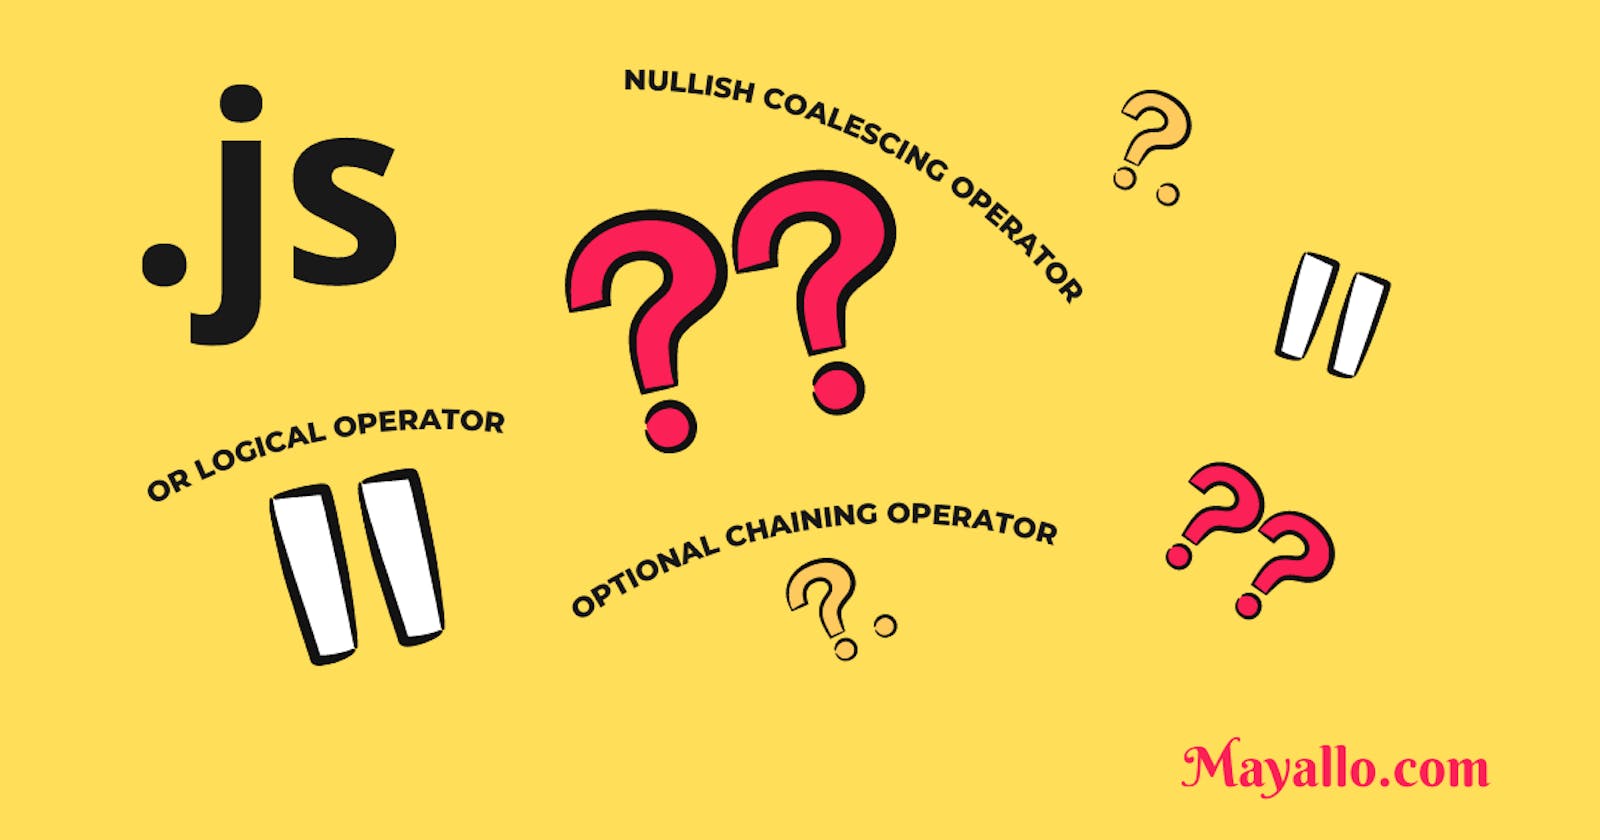 The Double Question Mark (Nullish Coalescing Operator) in JavaScript